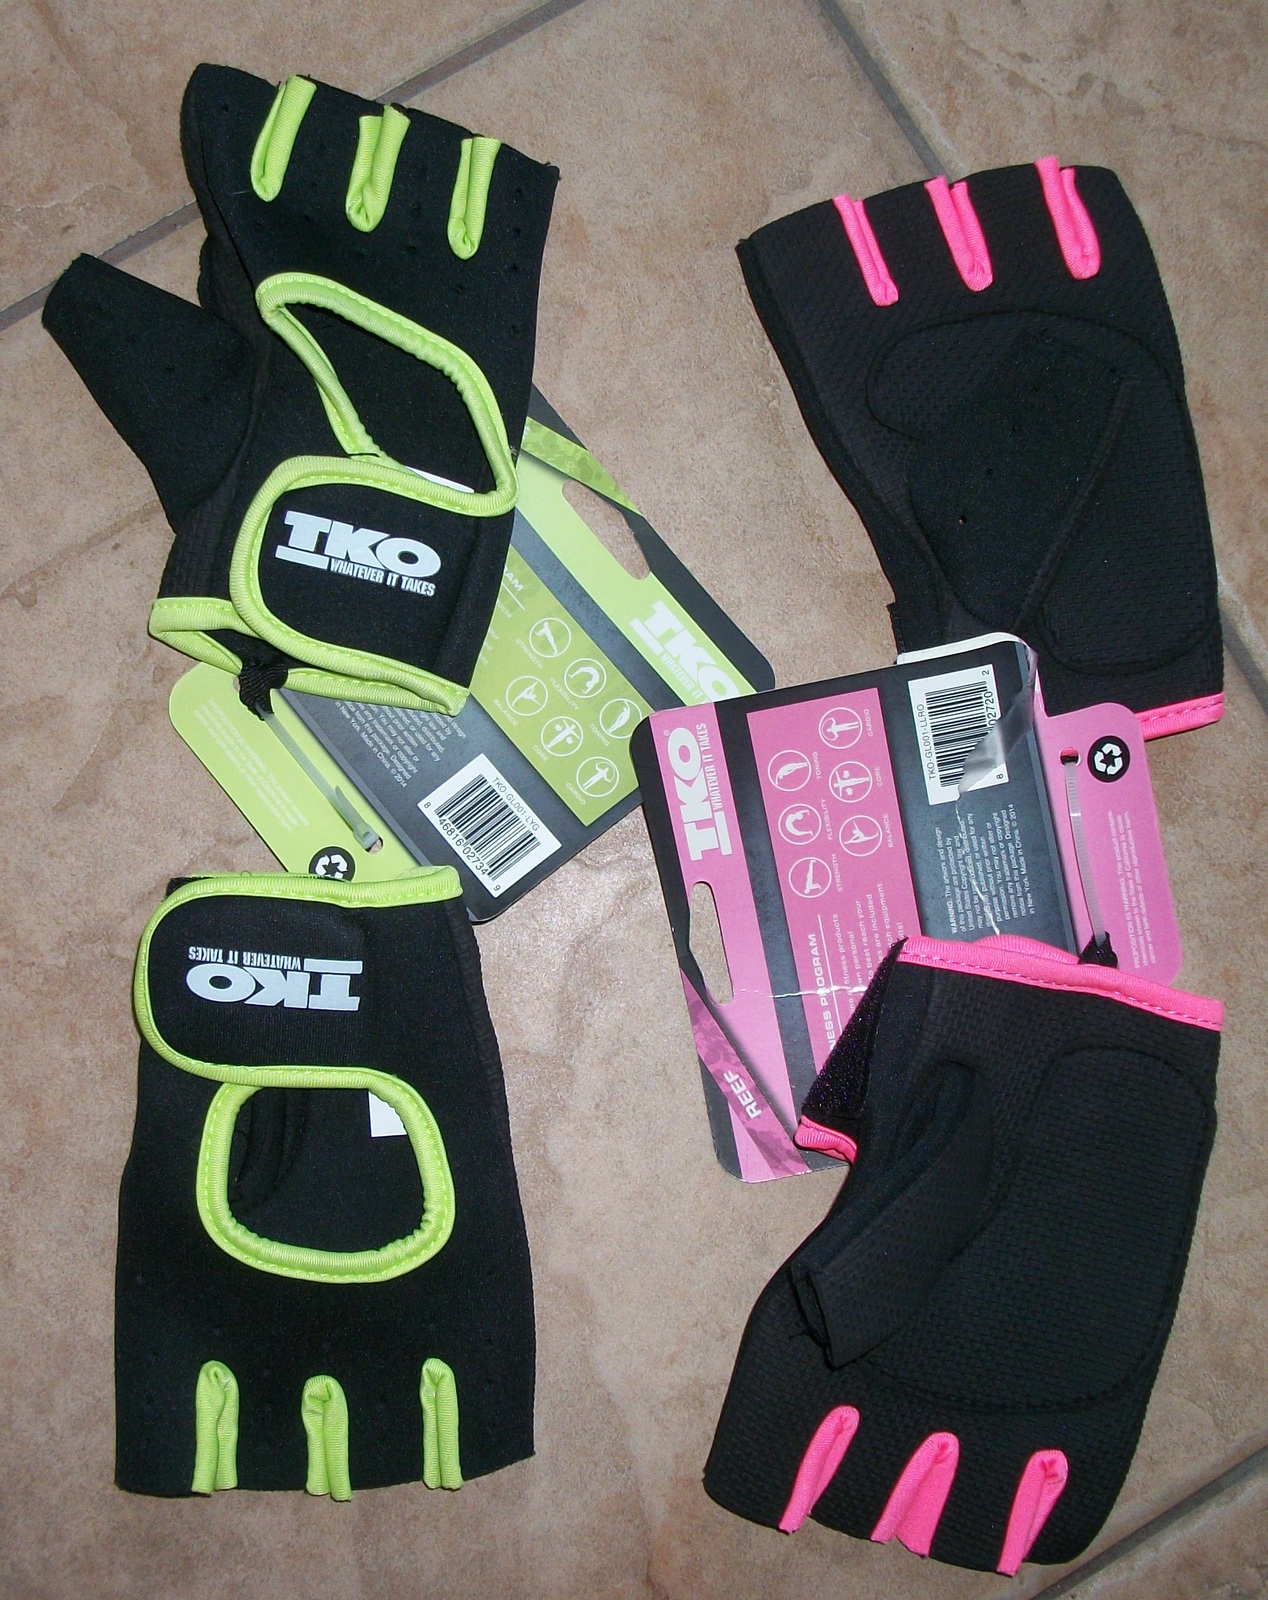 Primary image for weight gloves size large pink or lime green by tko brand new